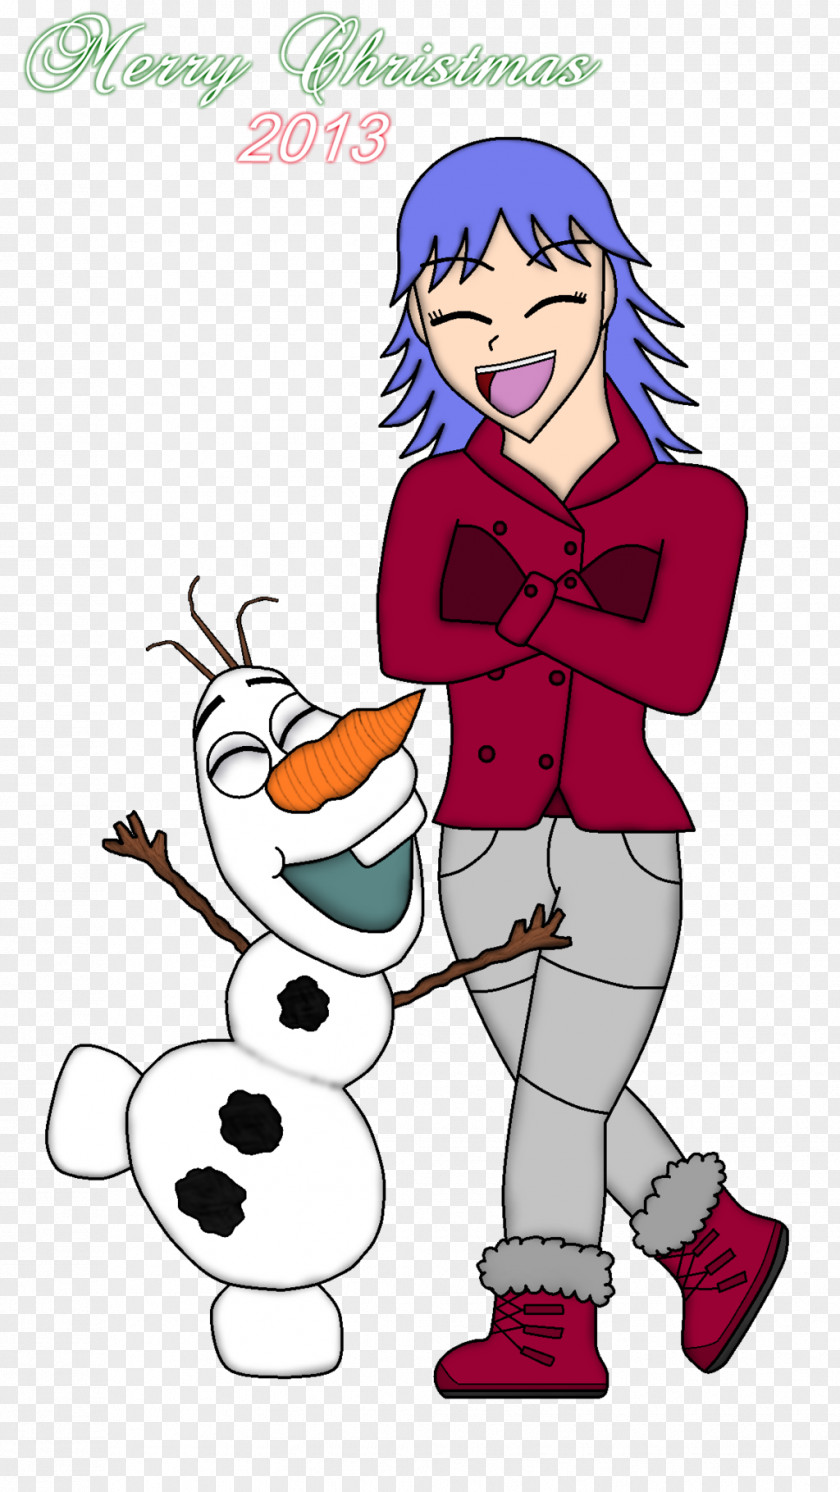 Christmas Olaf Frozen Clip Art PNG